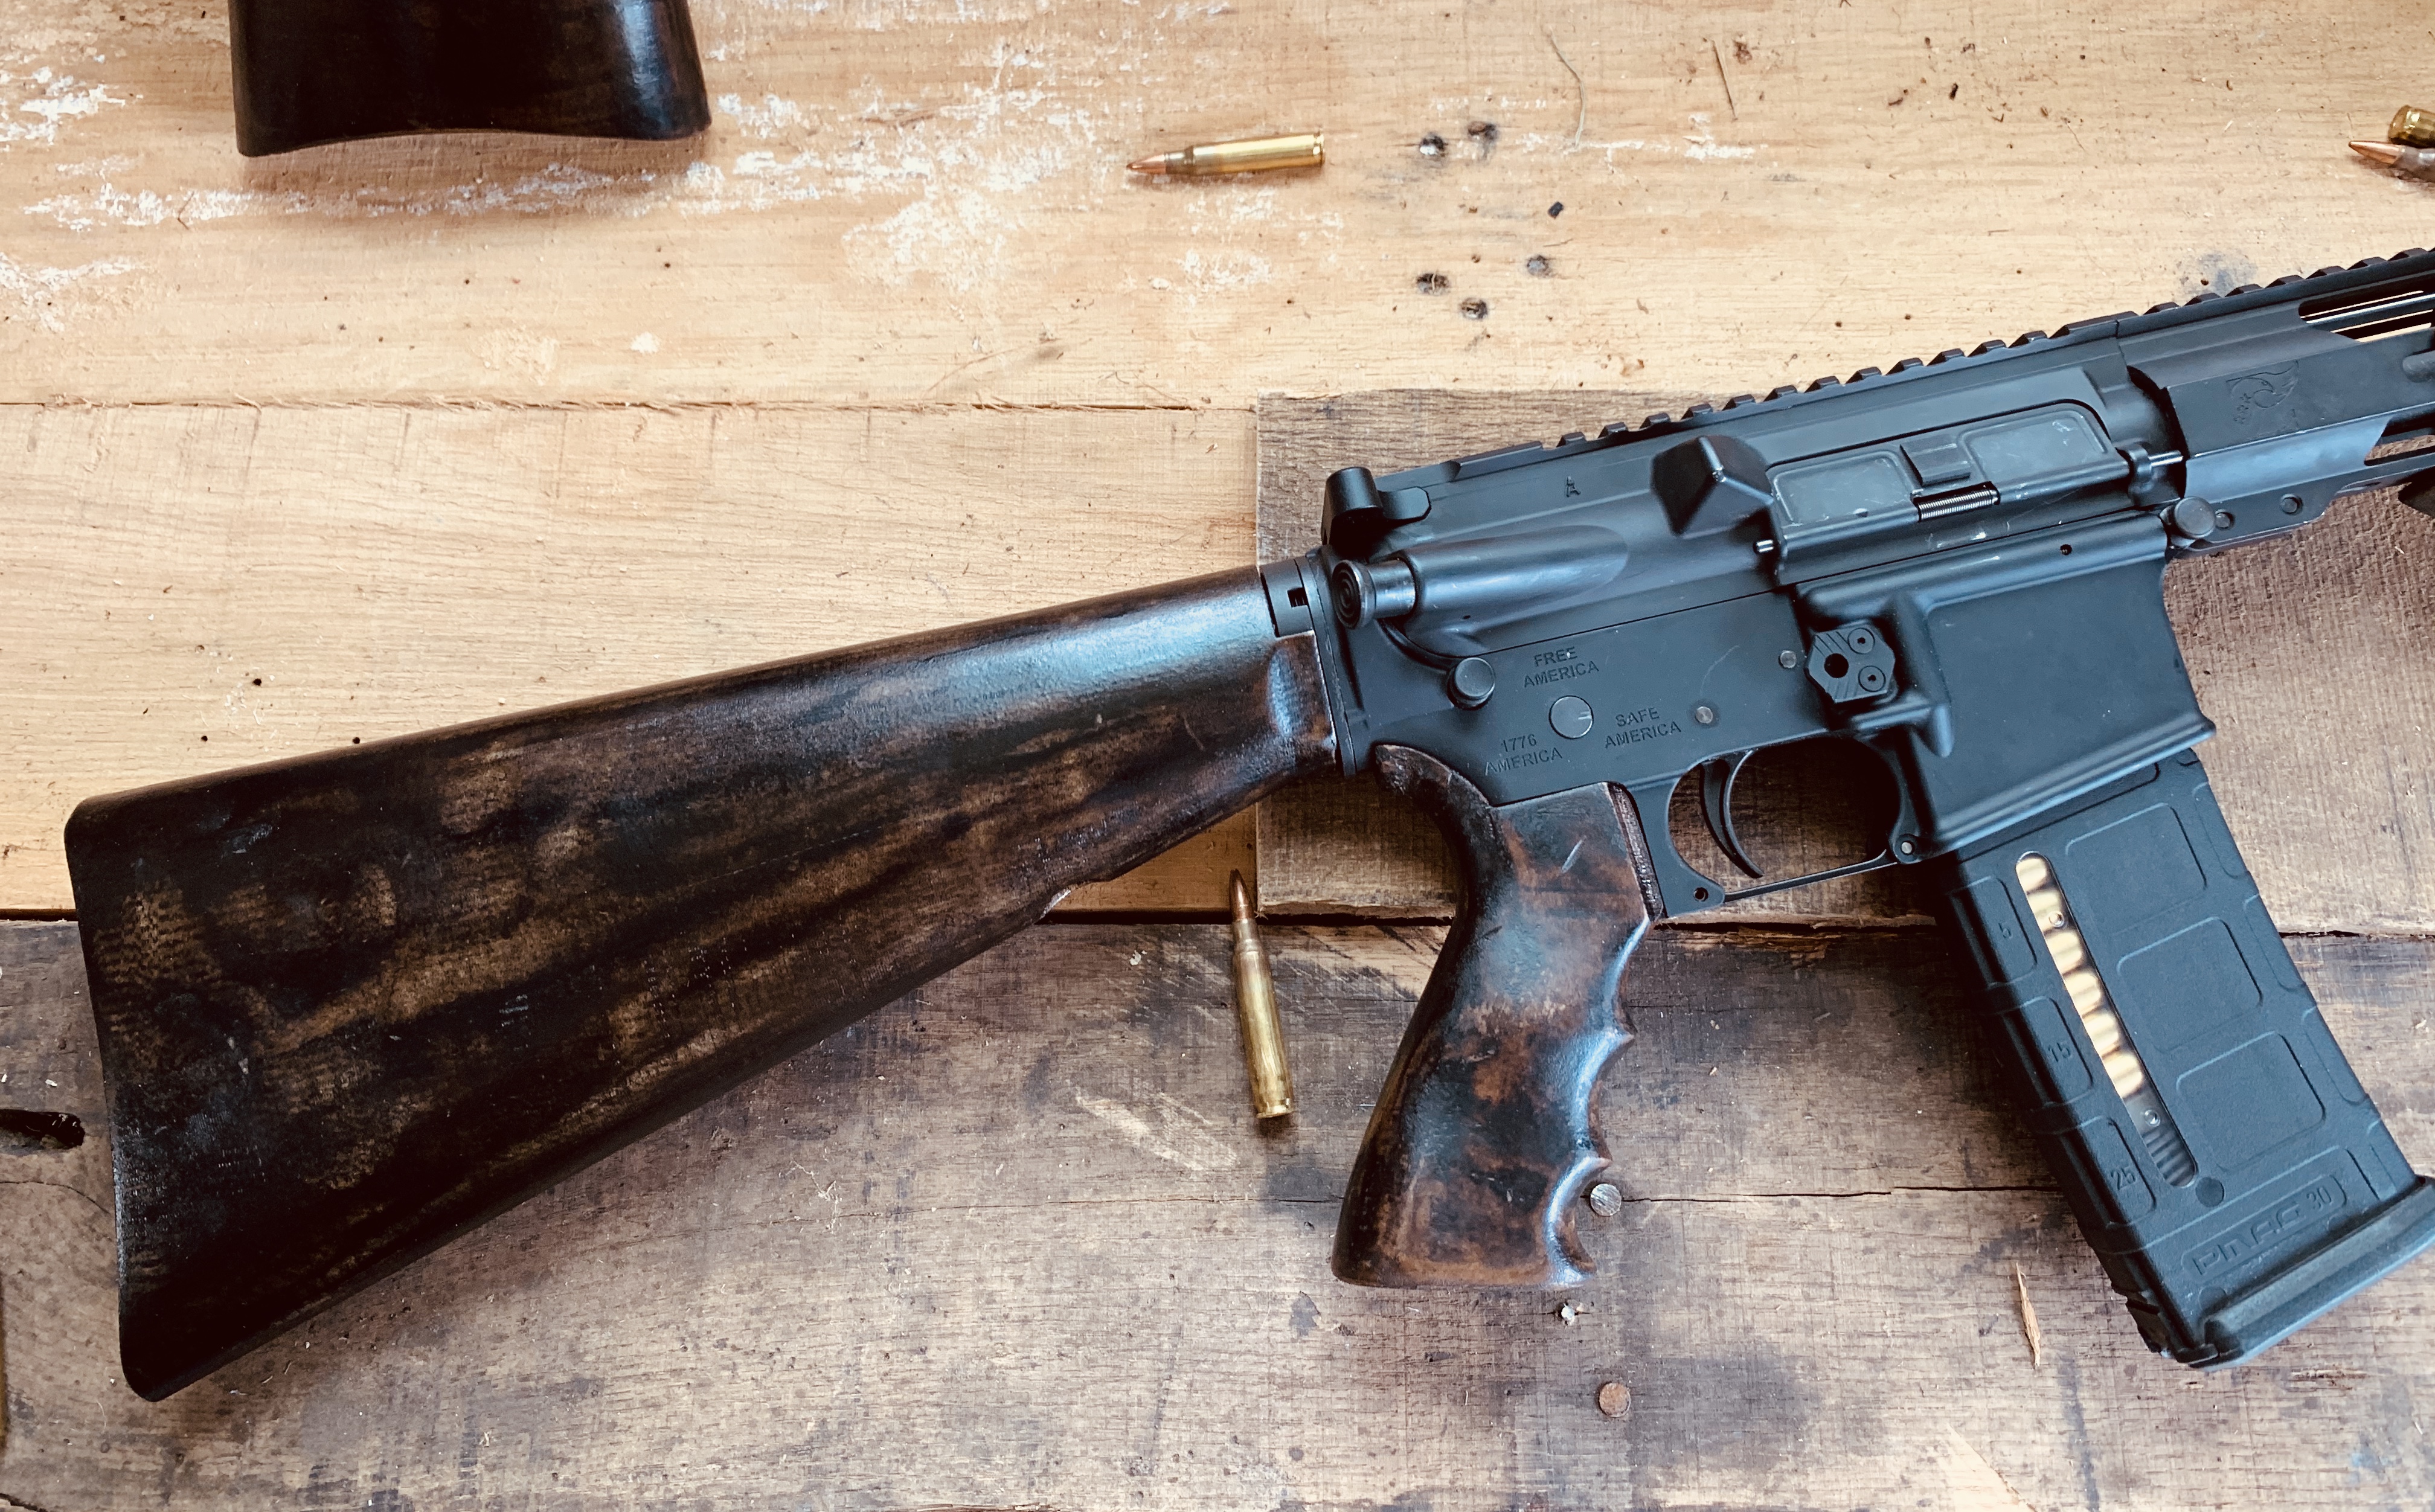 Achieve Aesthetic Overmatch with Black Wood USA's Wooden AR-15 Furnitu...